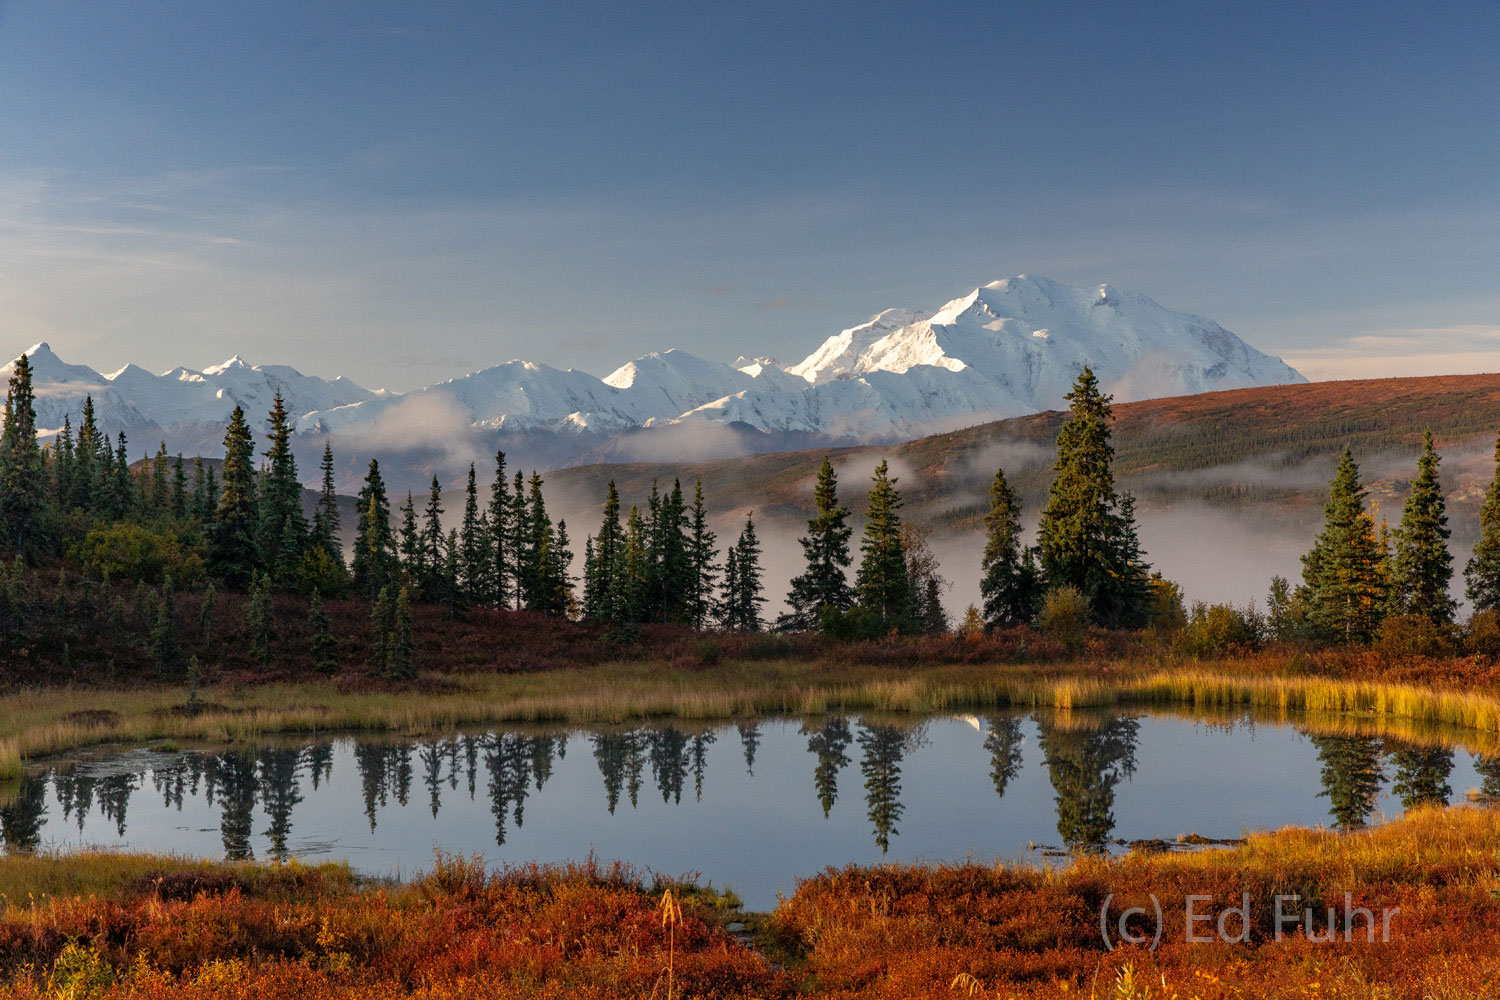 Surrounded by berry bushes that have turned red with autumn's arrival, Nugget Pond is the perfect place to watch Denali in the...